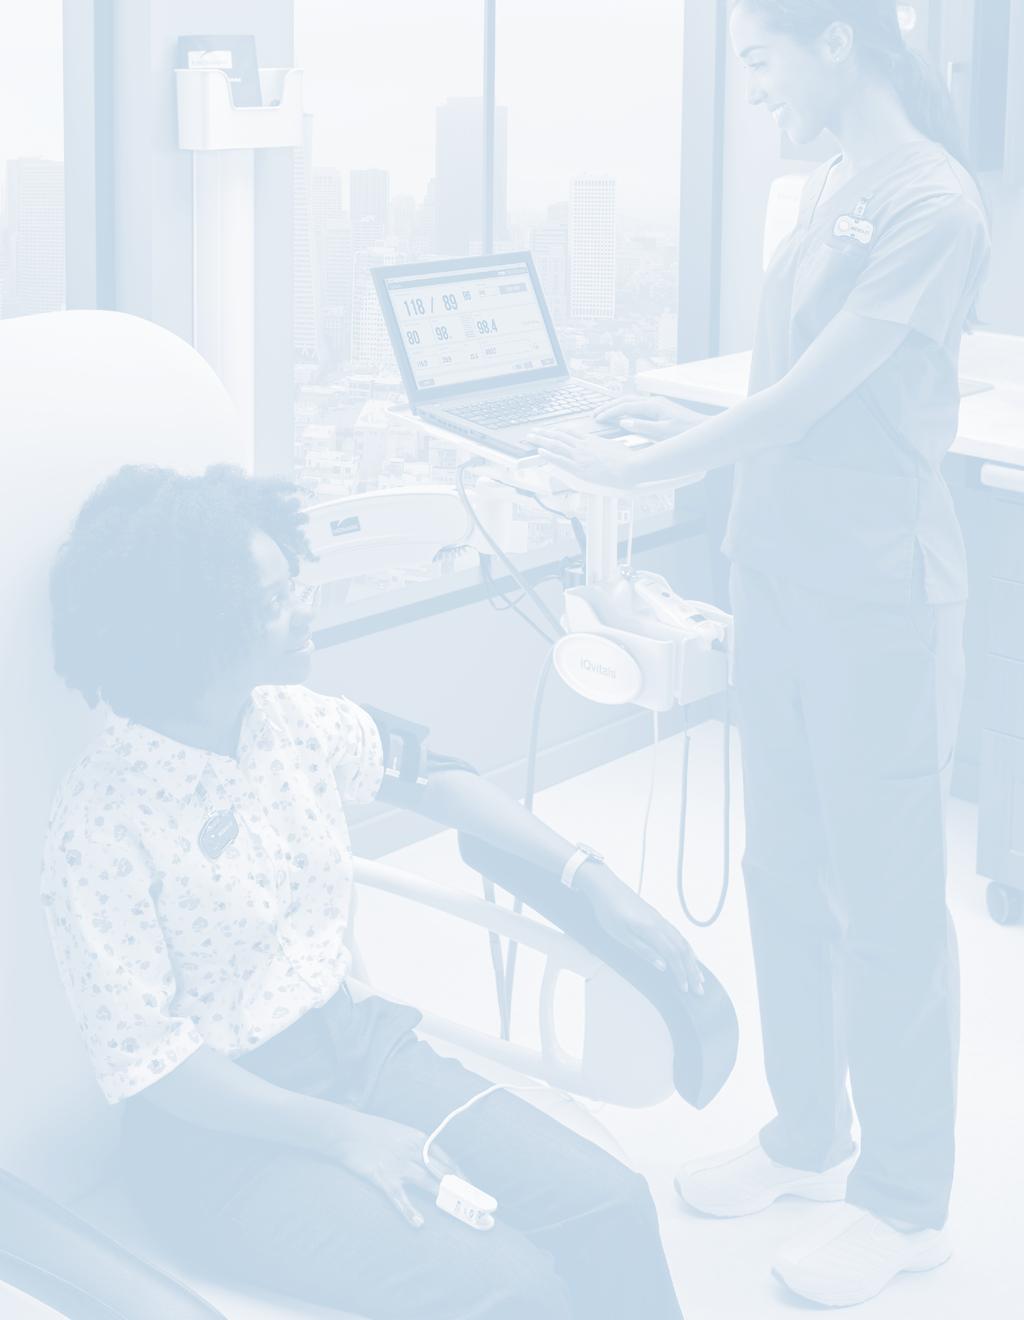 Introduction This white paper examines how new technologies are creating a fully connected point of care ecosystem in outpatient facilities to enhance the interaction between patients and caregivers.